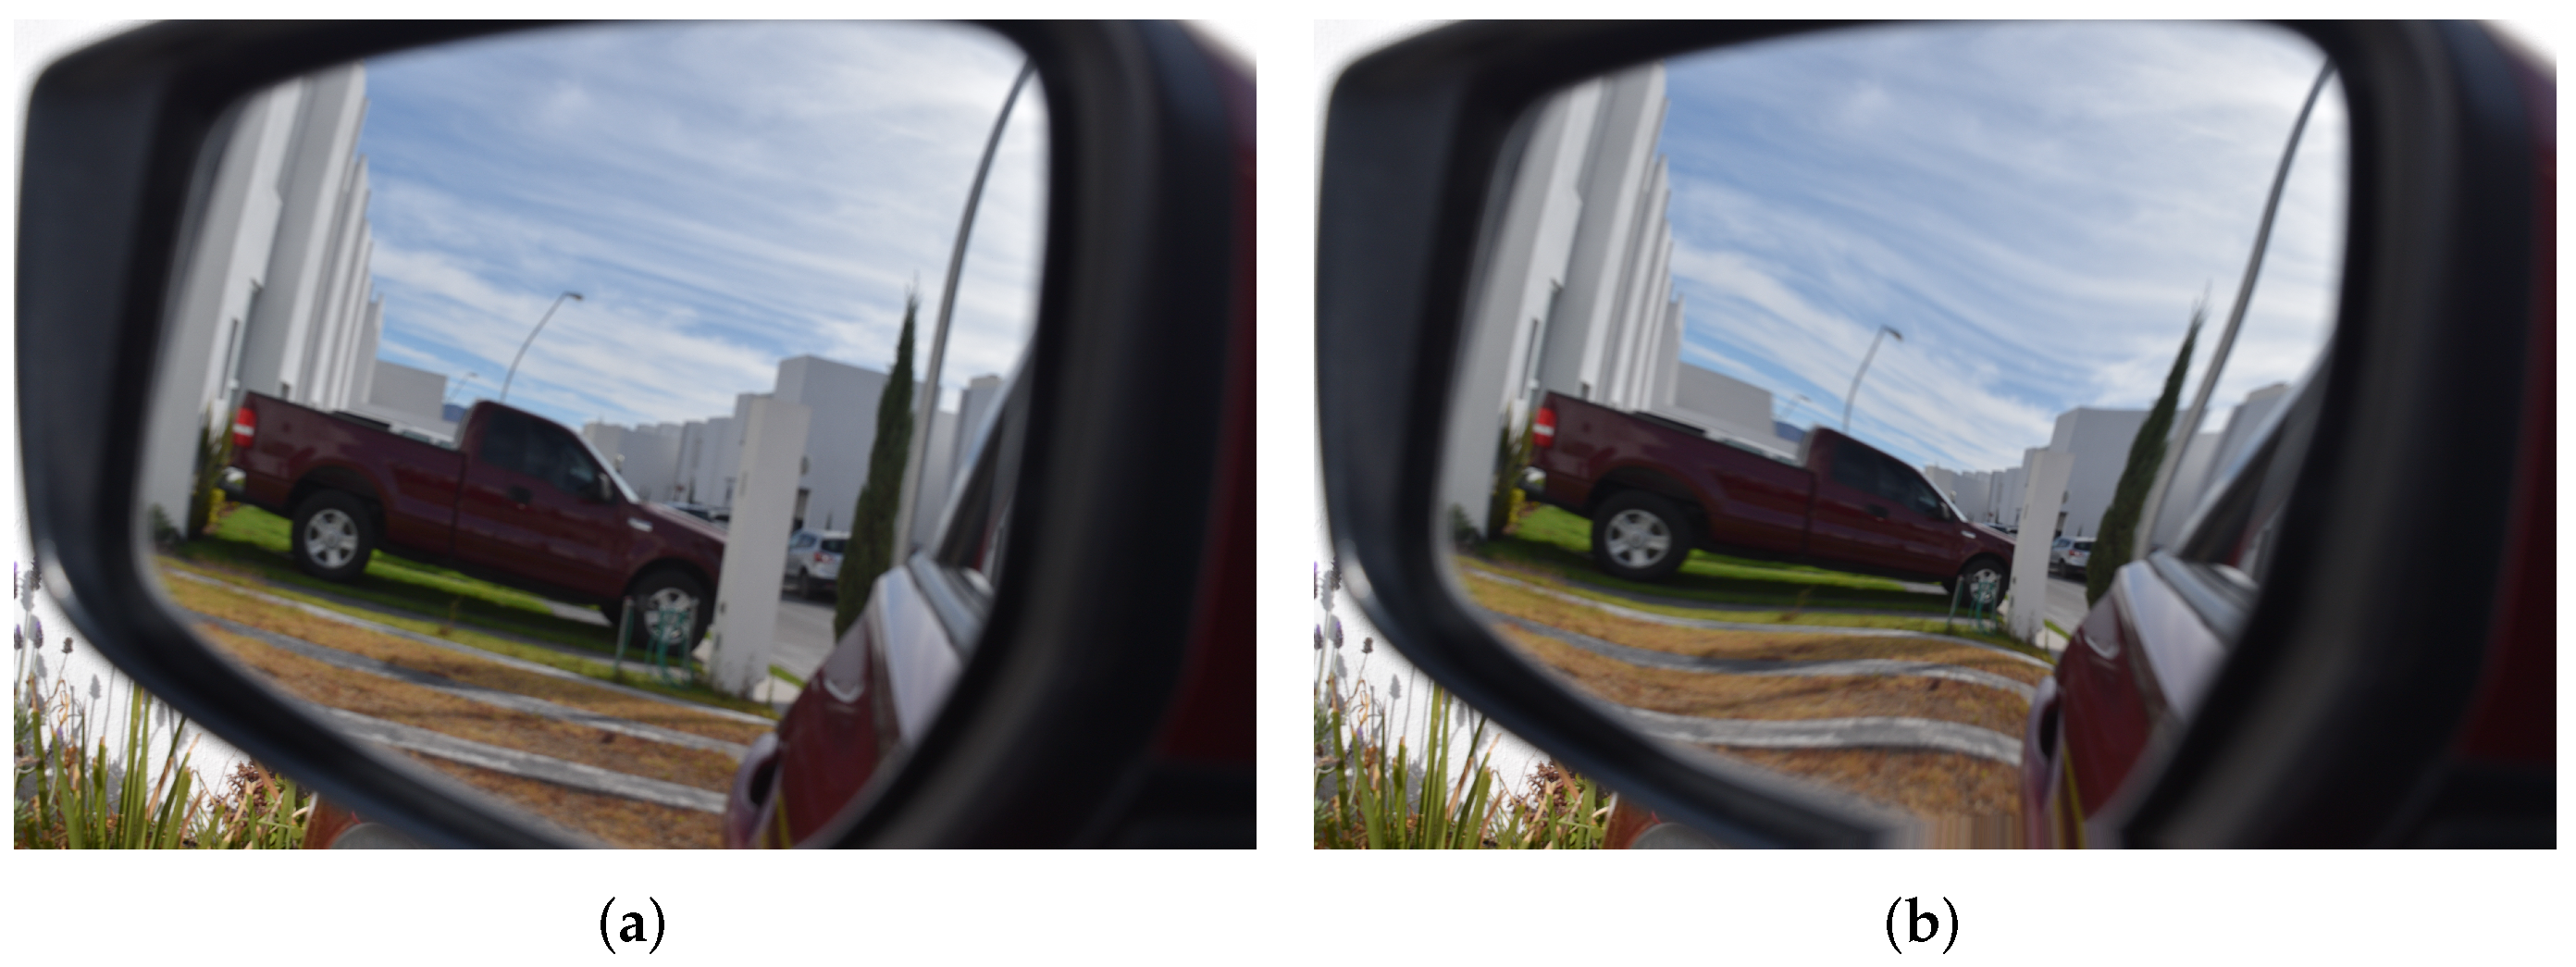 Rear-view mirror: reflecting about practice through the lens of